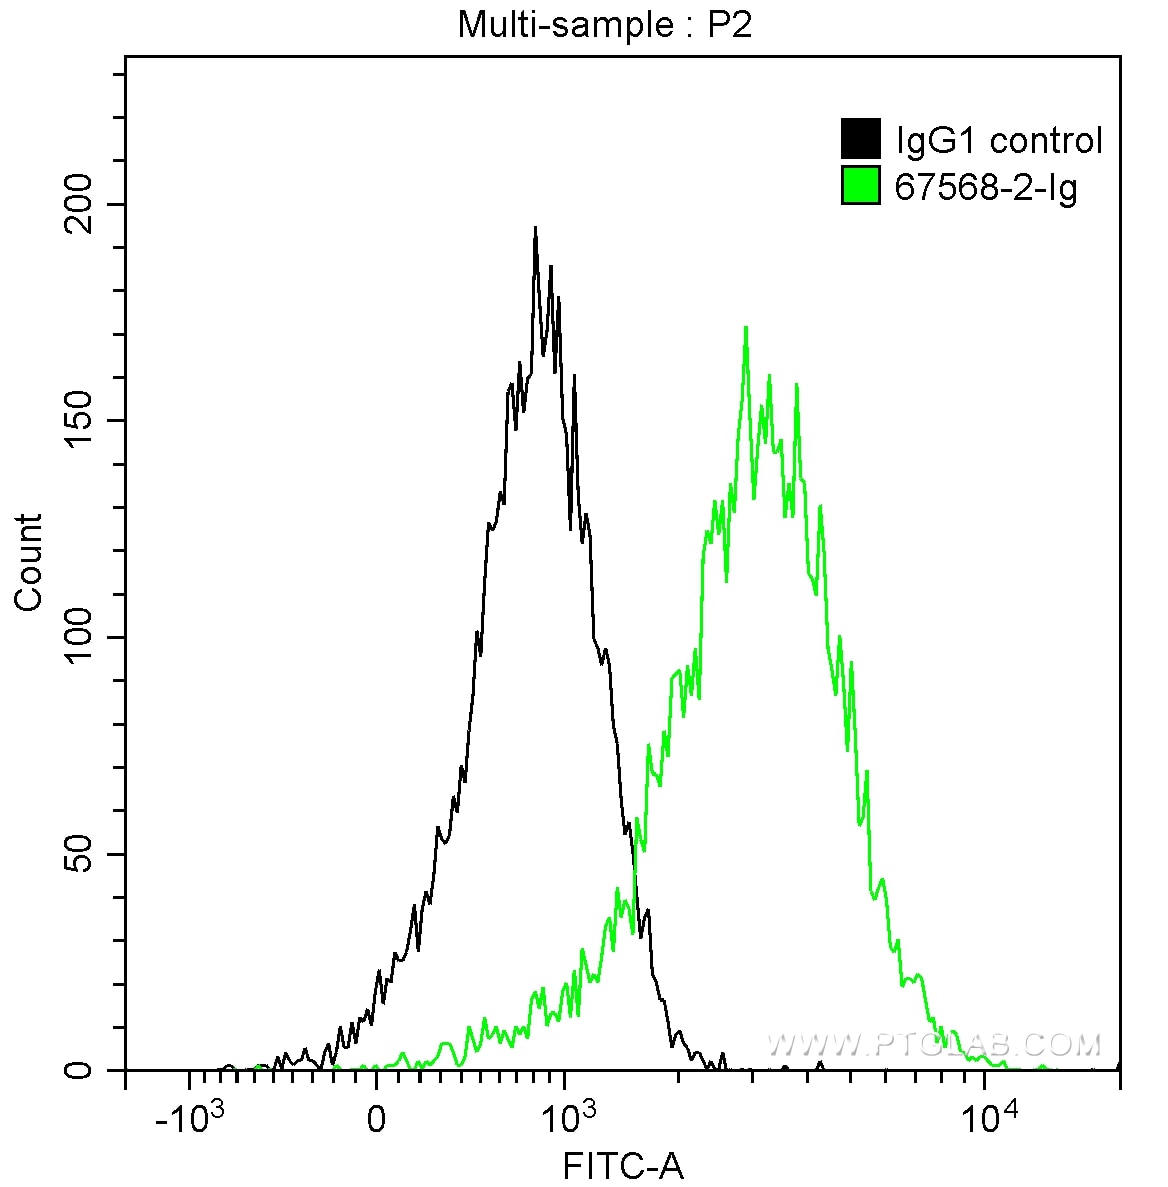 Flow cytometry (FC) experiment of HepG2 cells using STAT4 Monoclonal antibody (67568-2-Ig)